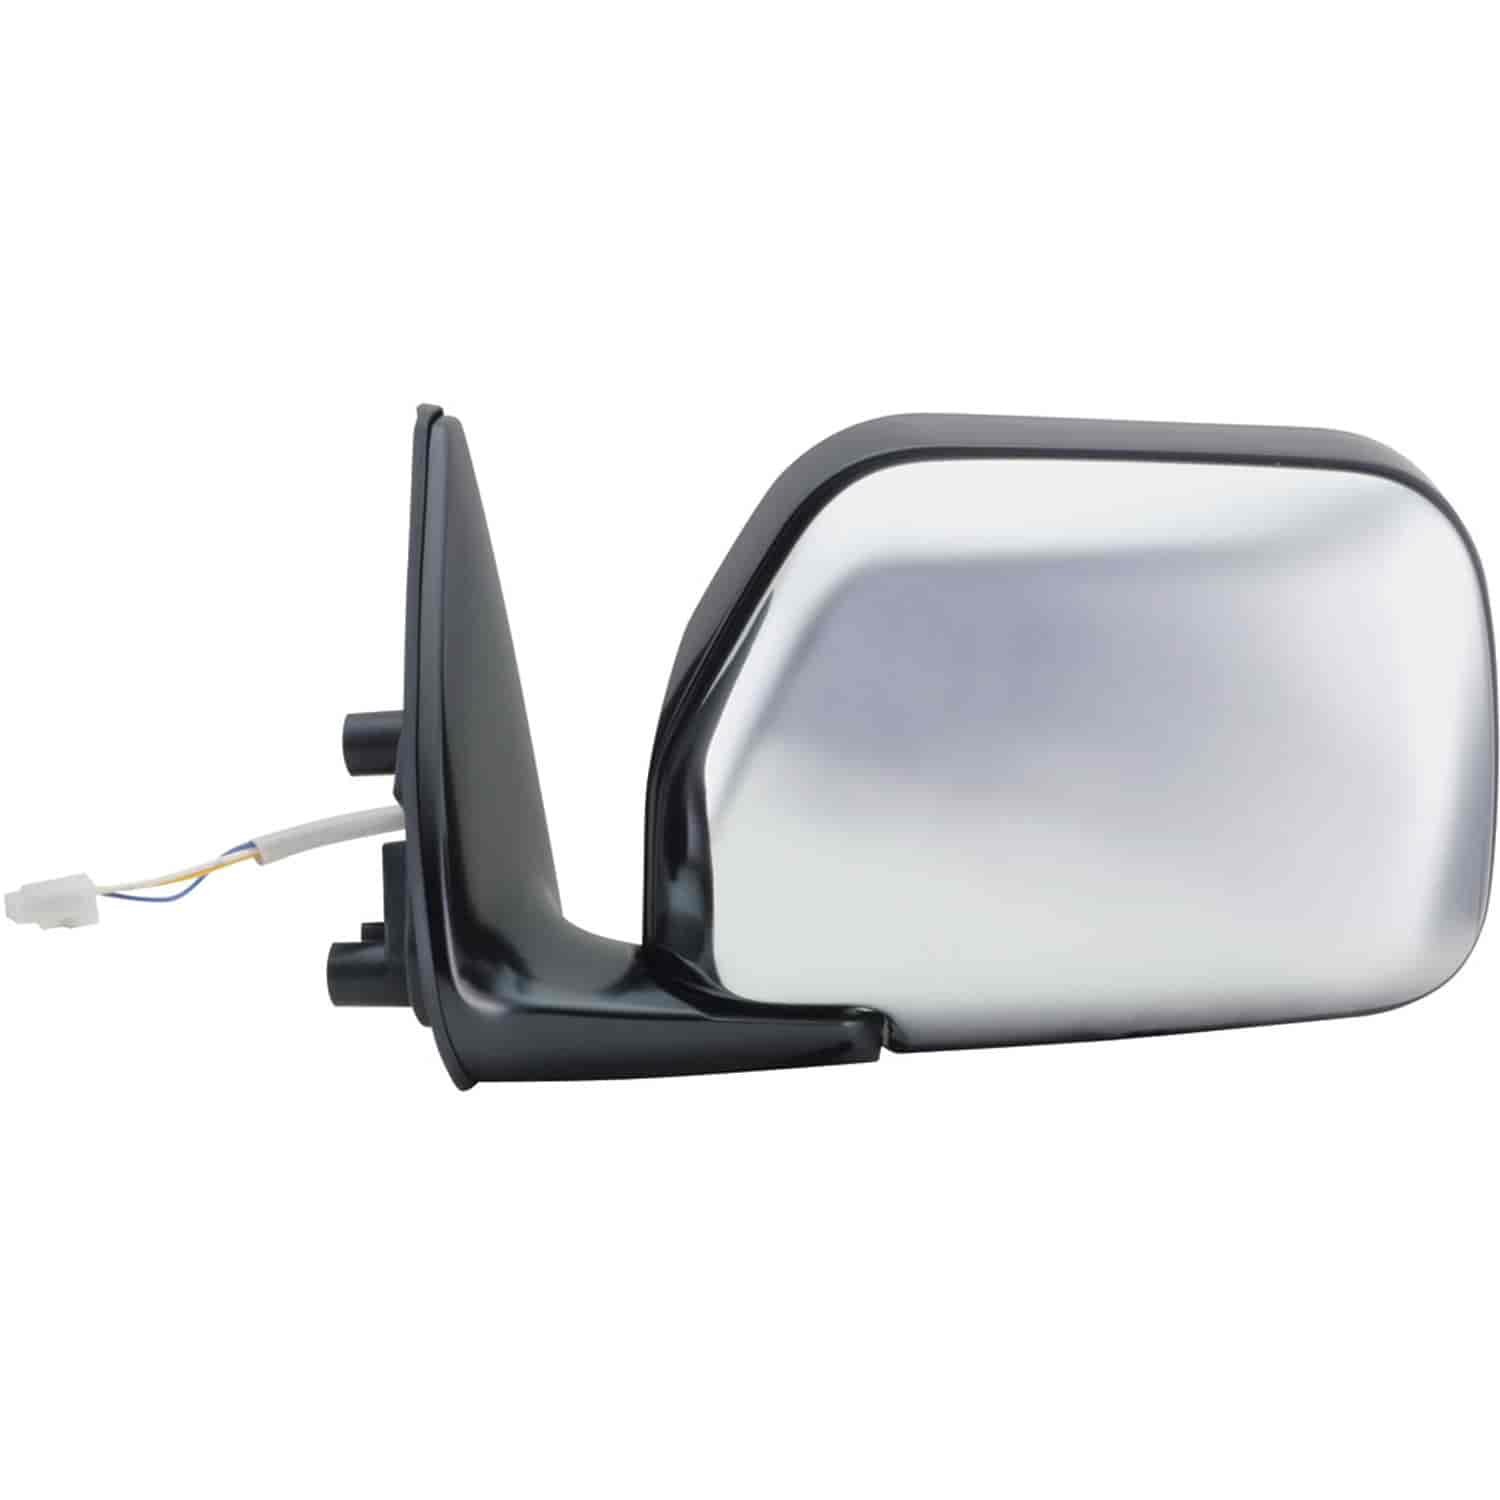 OEM Style Replacement mirror for 93-98 Toyota T-100 Pick-Up driver side mirror tested to fit and fun